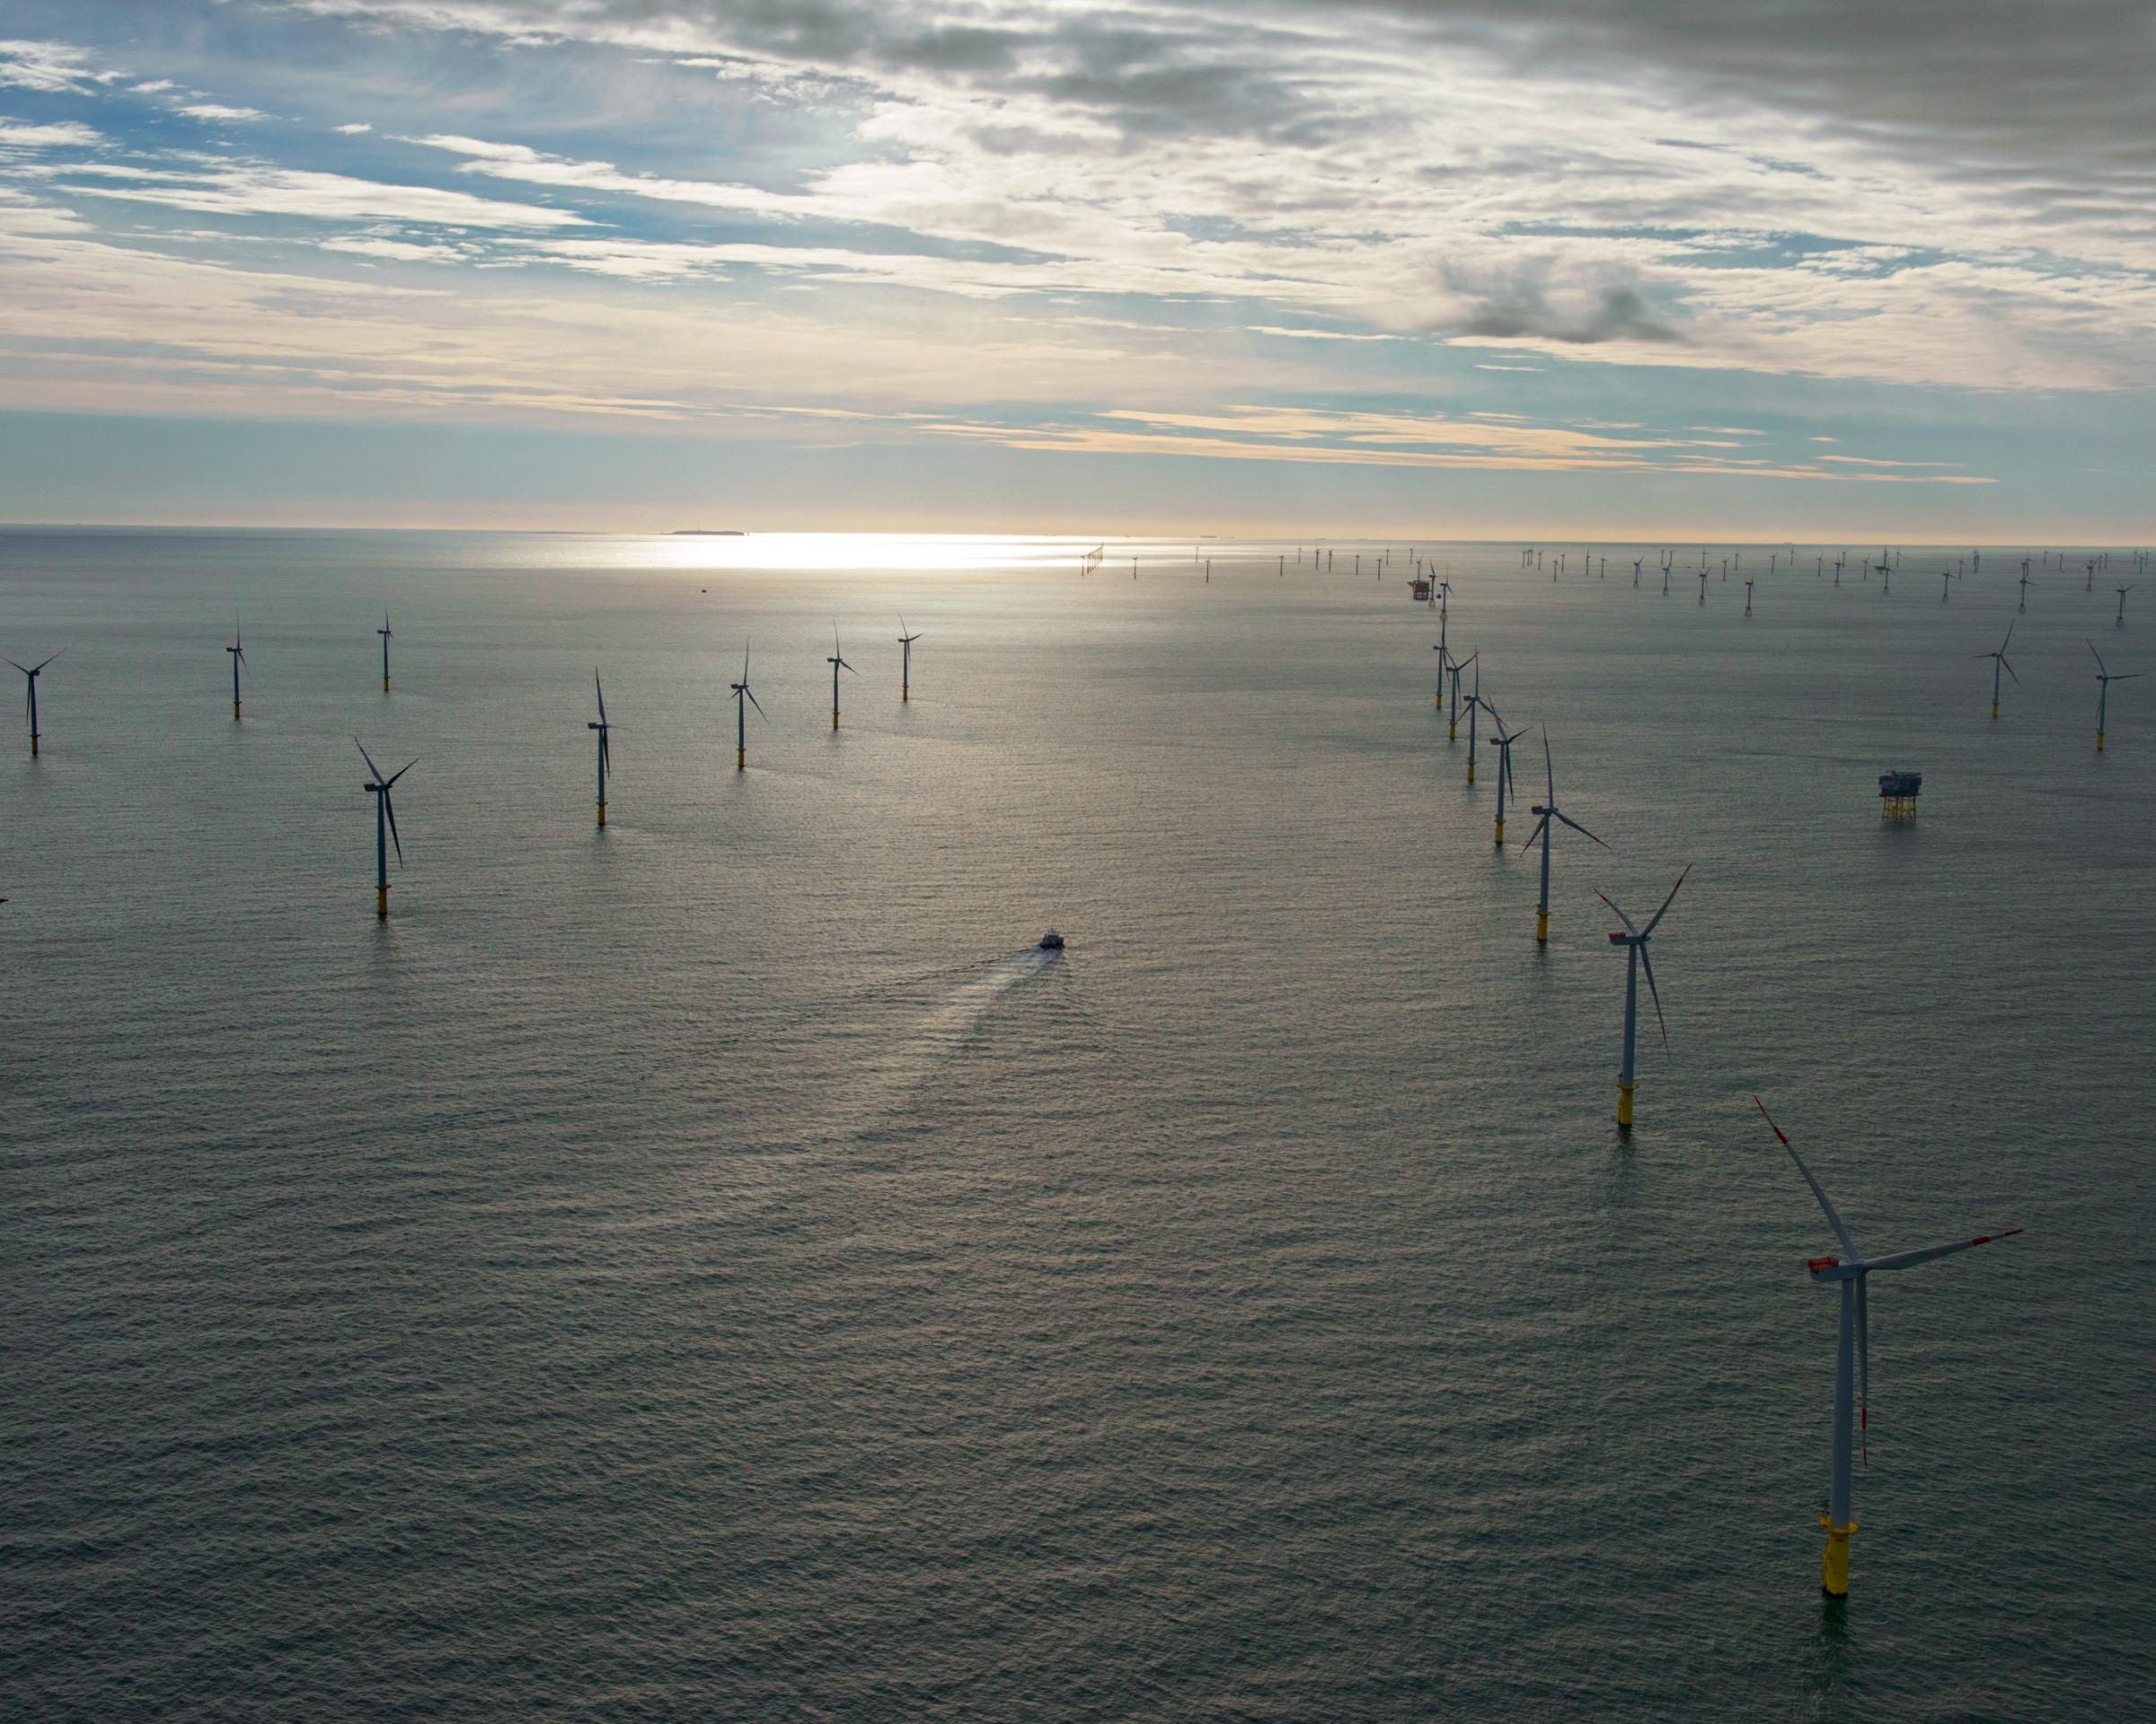 The Amrumbank West (foreground), Nordsee Ost (middleground) and Meerwind Süd/Ost (background) wind farms in the North Sea off of Hamburg, Germany.